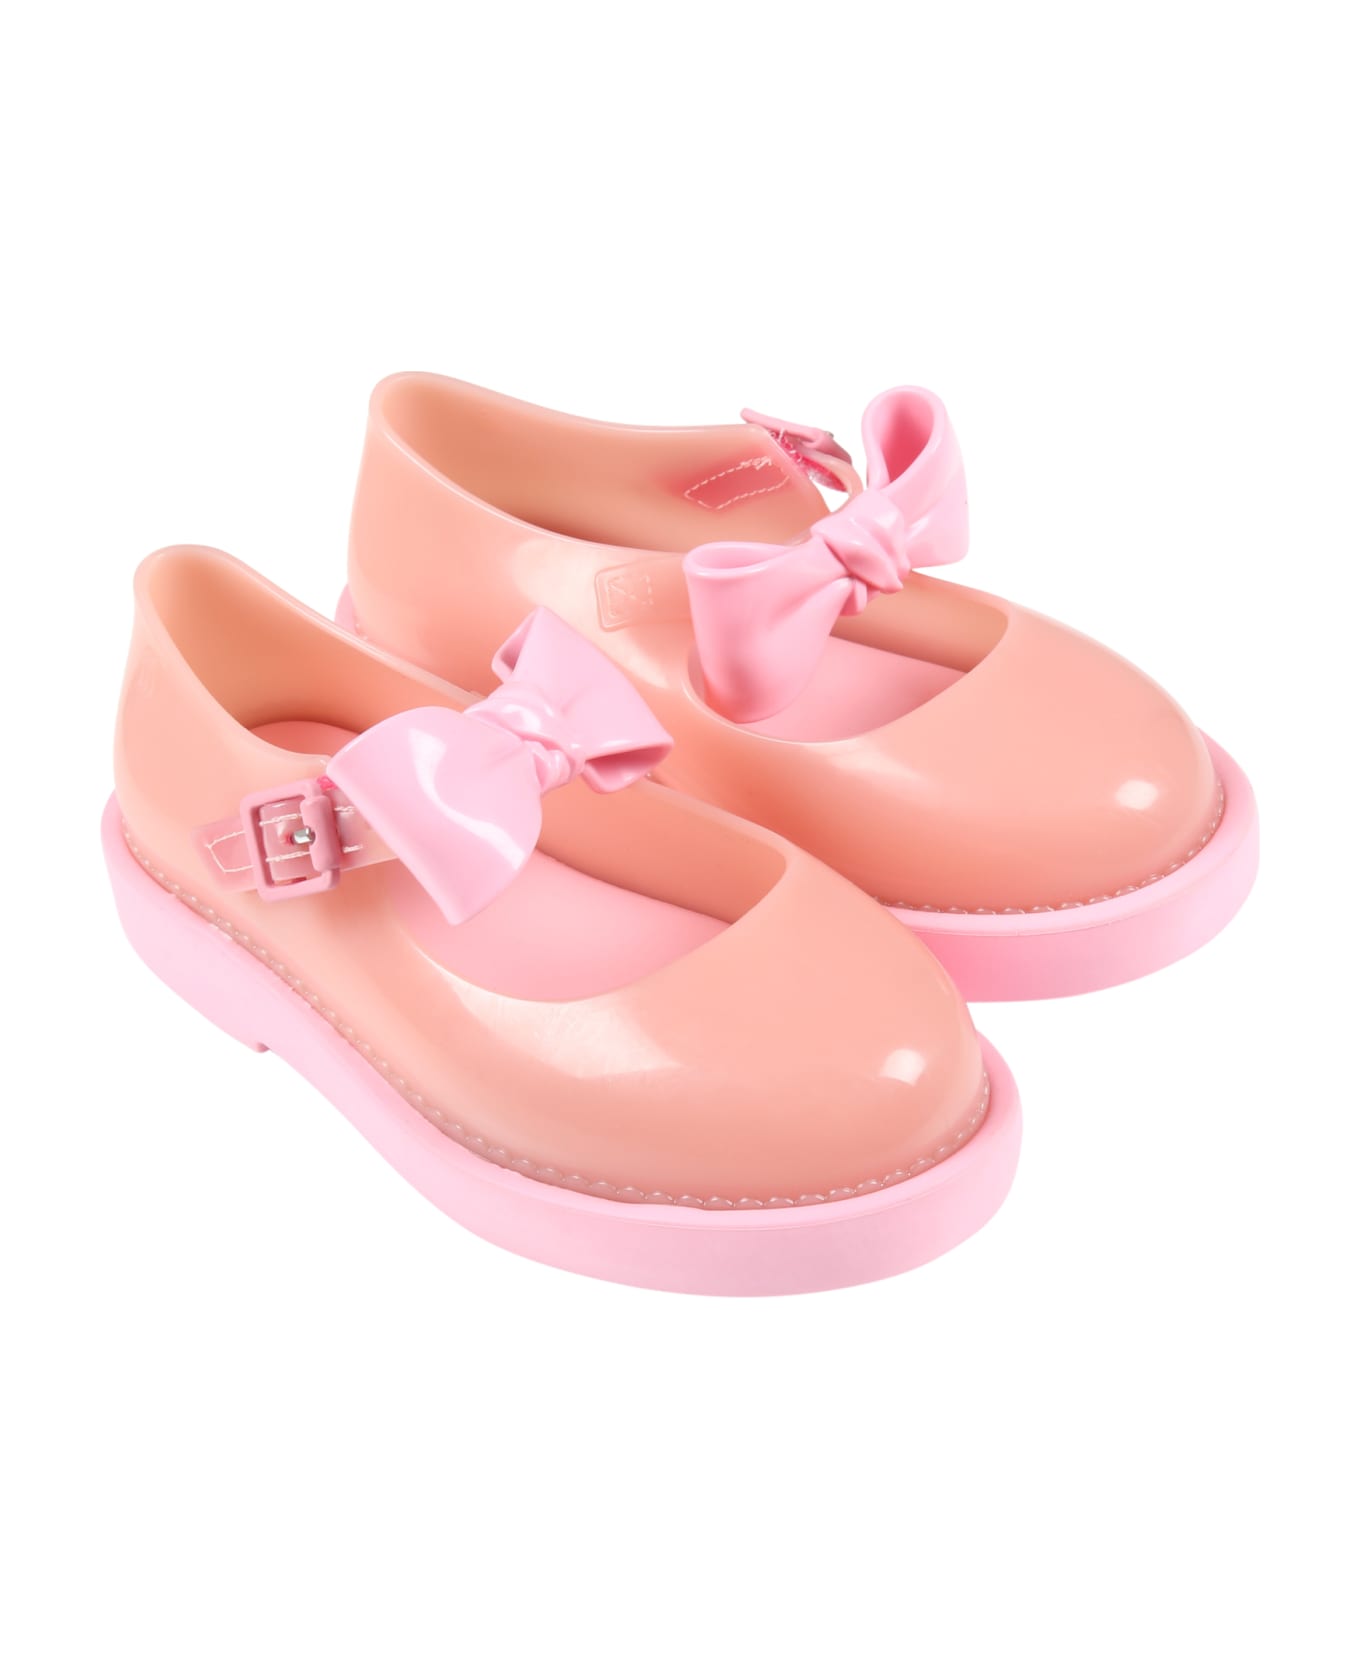 Melissa Pink Ballerina-flats For Girl With Bow - Pink